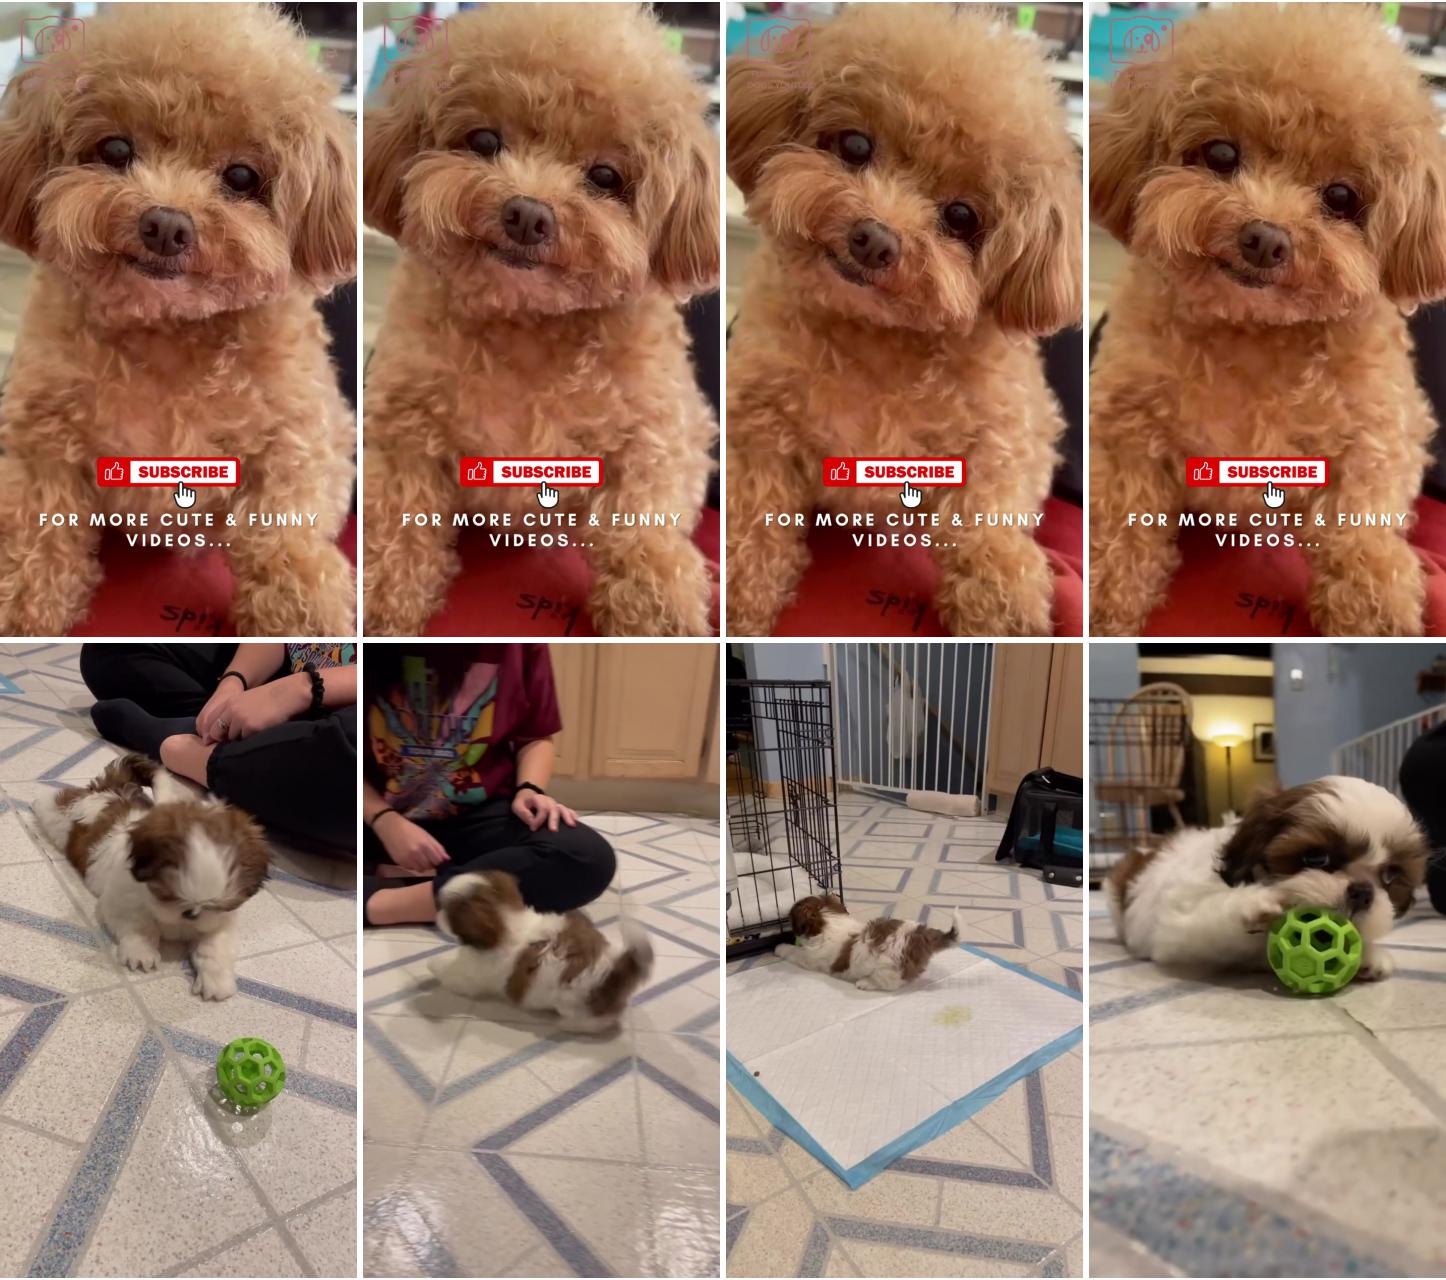   the love of this puppy will melt your heart ; cute fluffy puppies